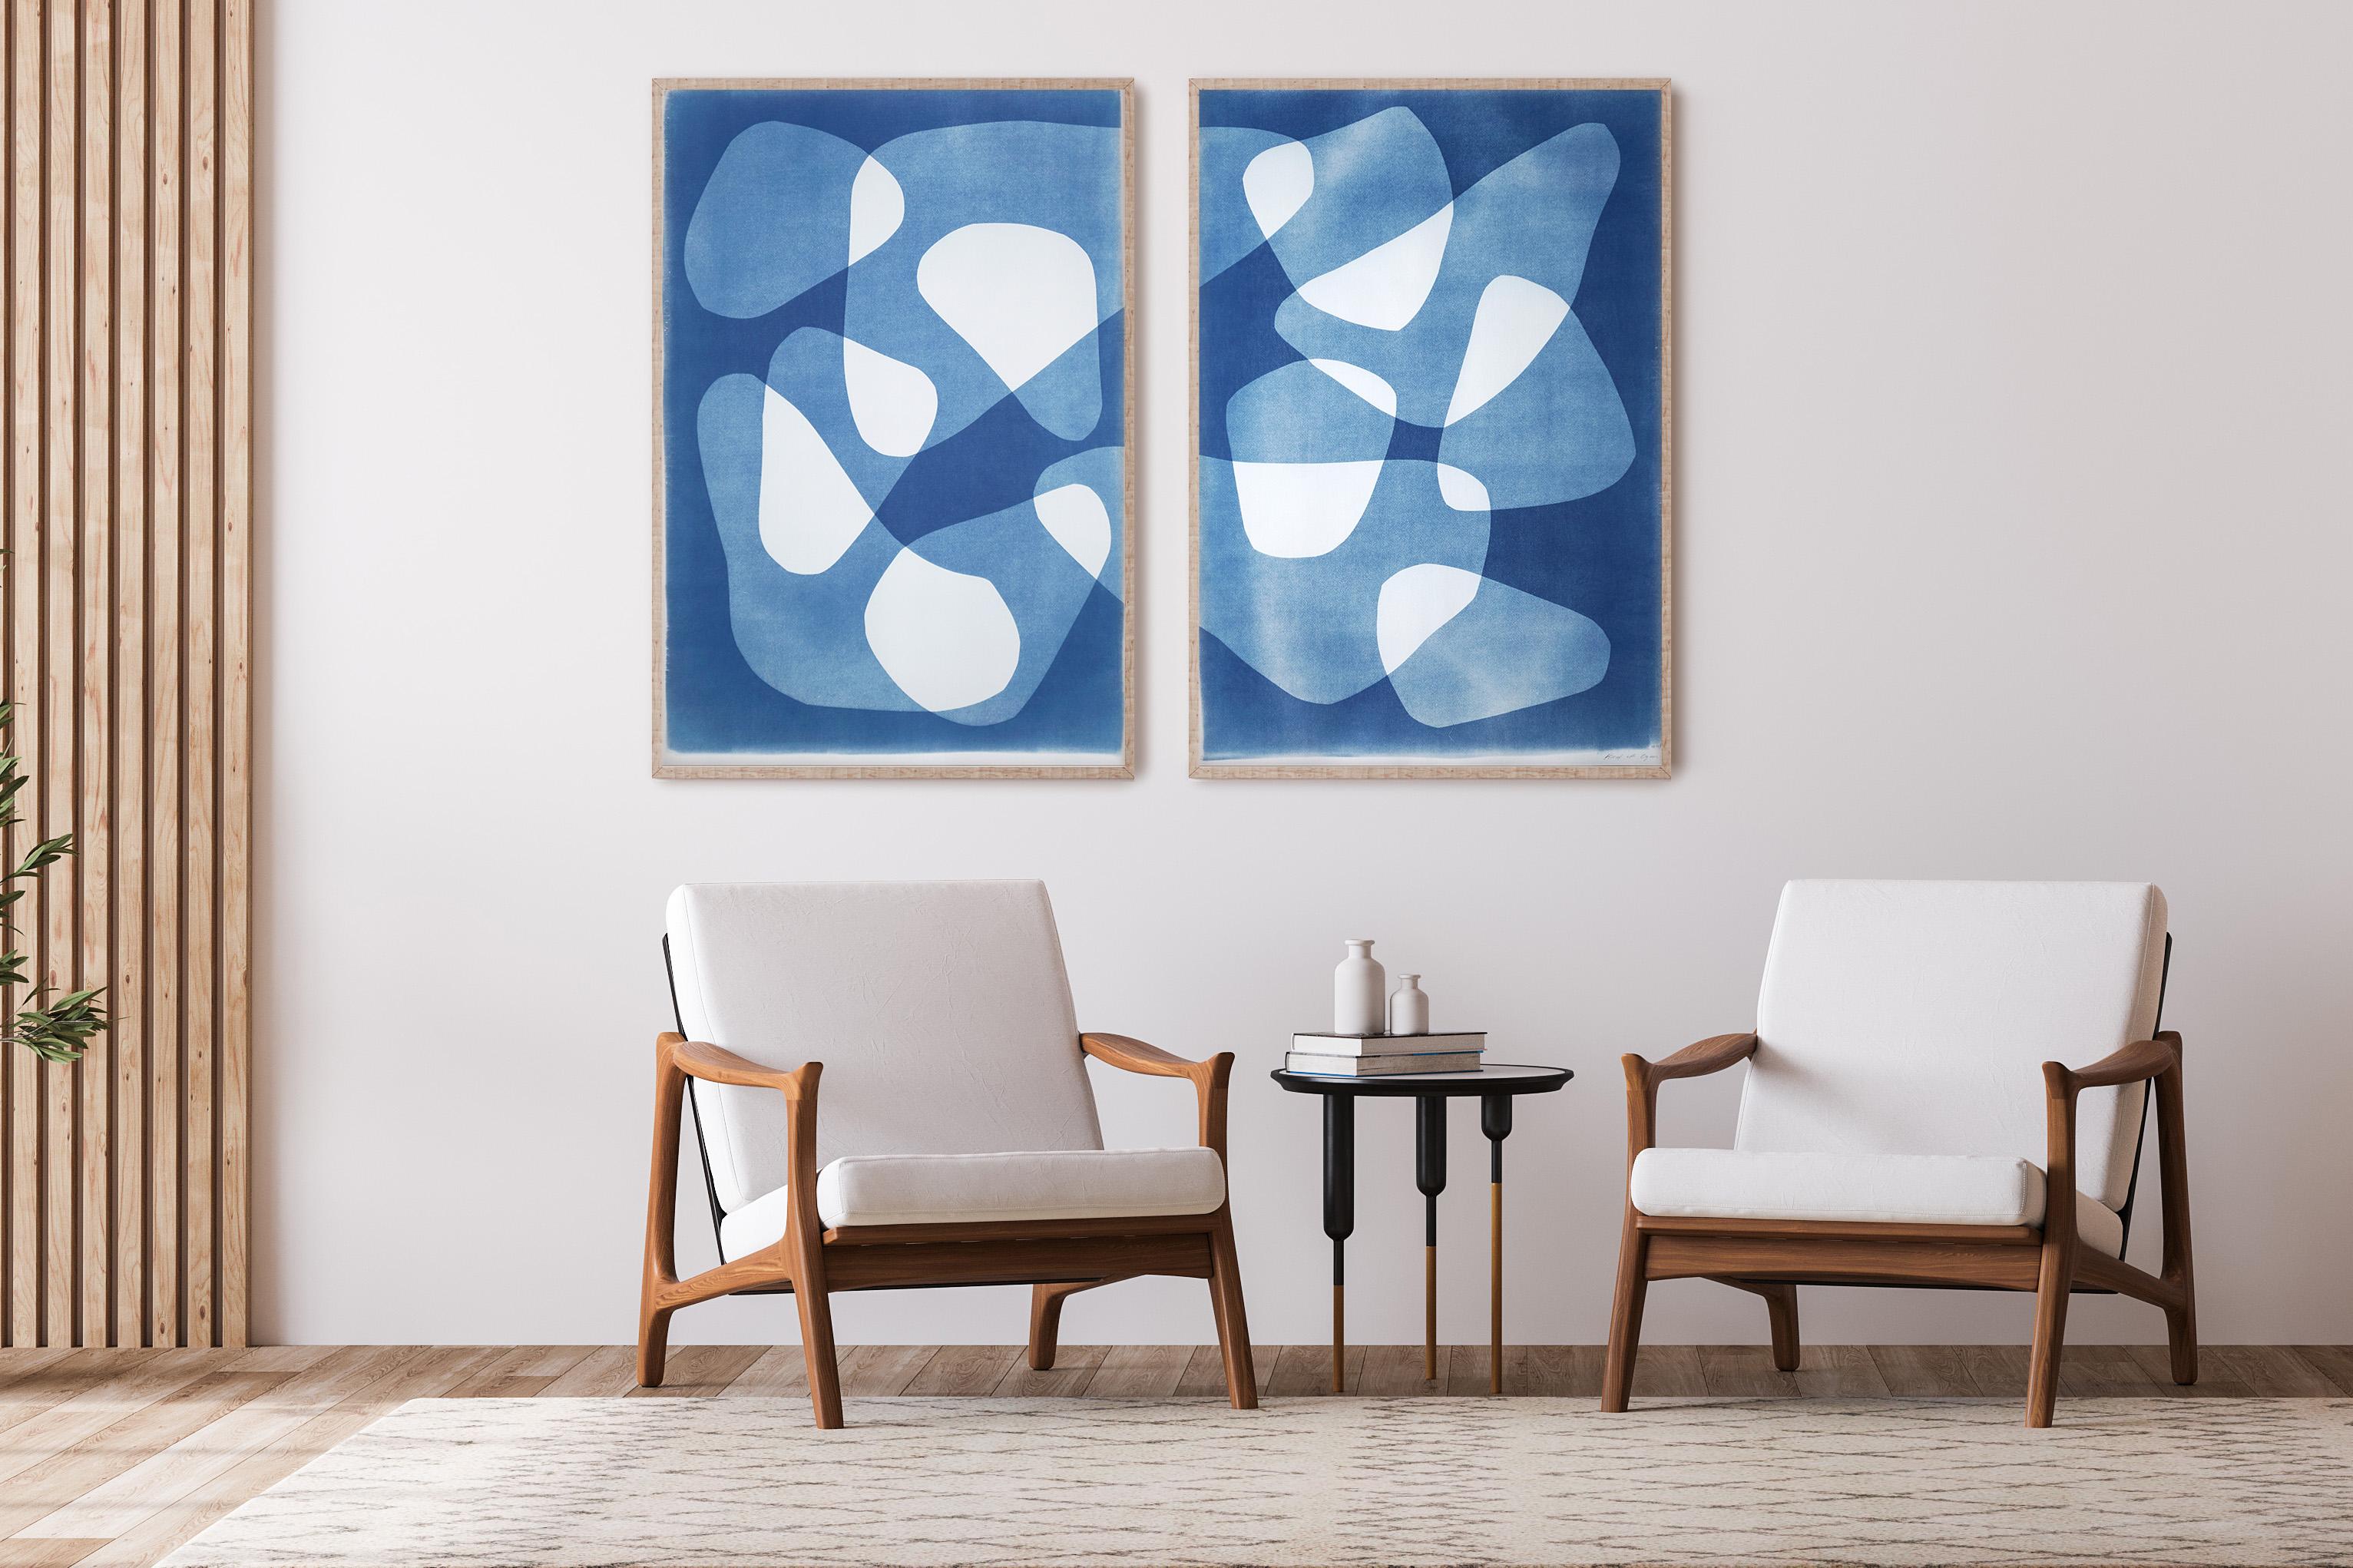 2022, Boomerangs in Movement, Large Diptych, Abstract Shapes in Blue, Monotype - Print by Kind of Cyan